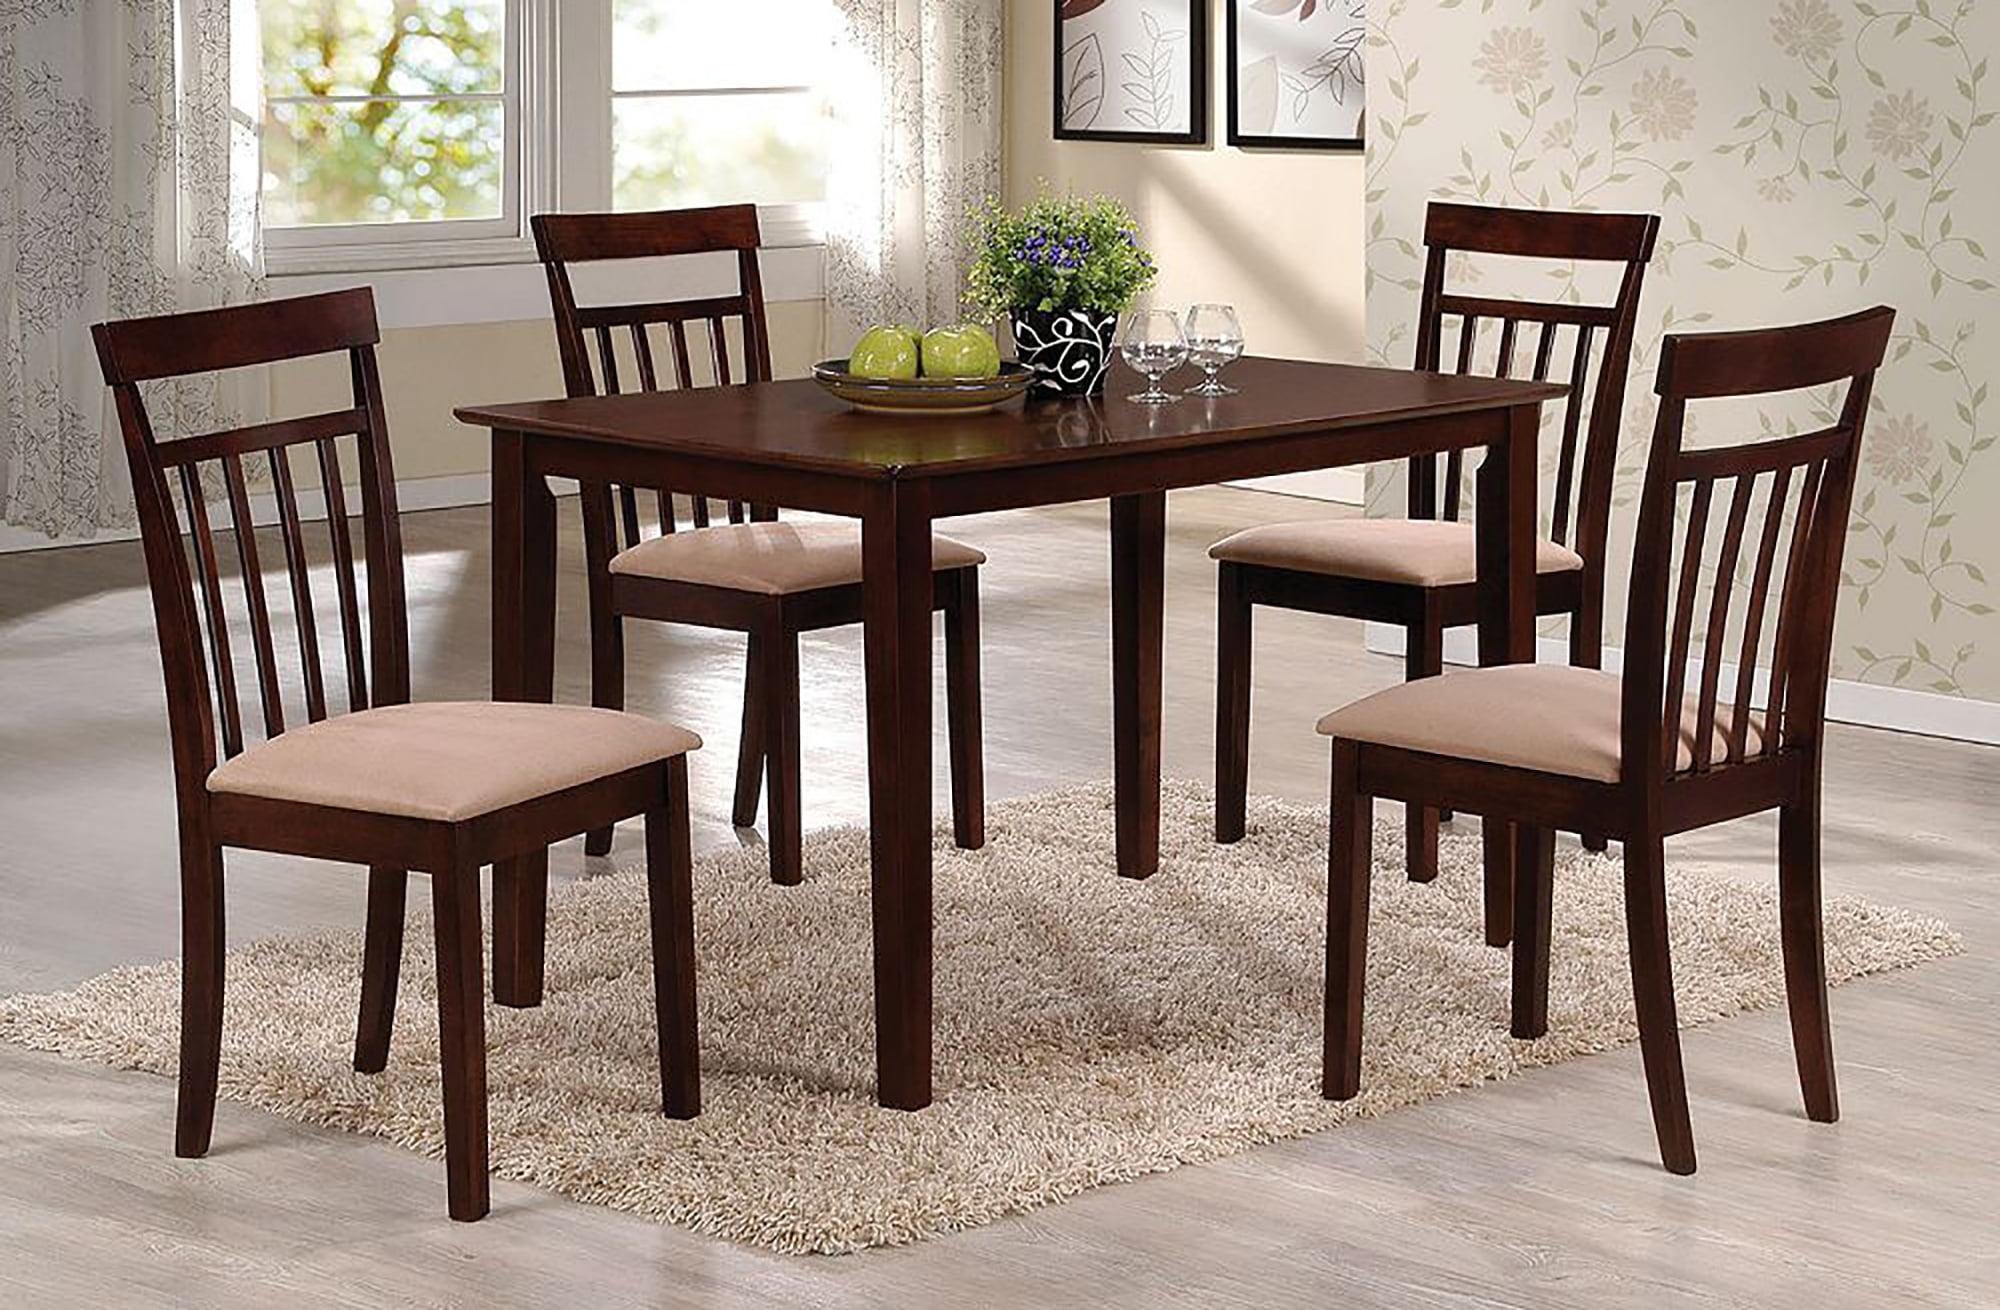 Espresso Finish Transitional 5-Piece Dining Set with Beige Microfiber Chairs